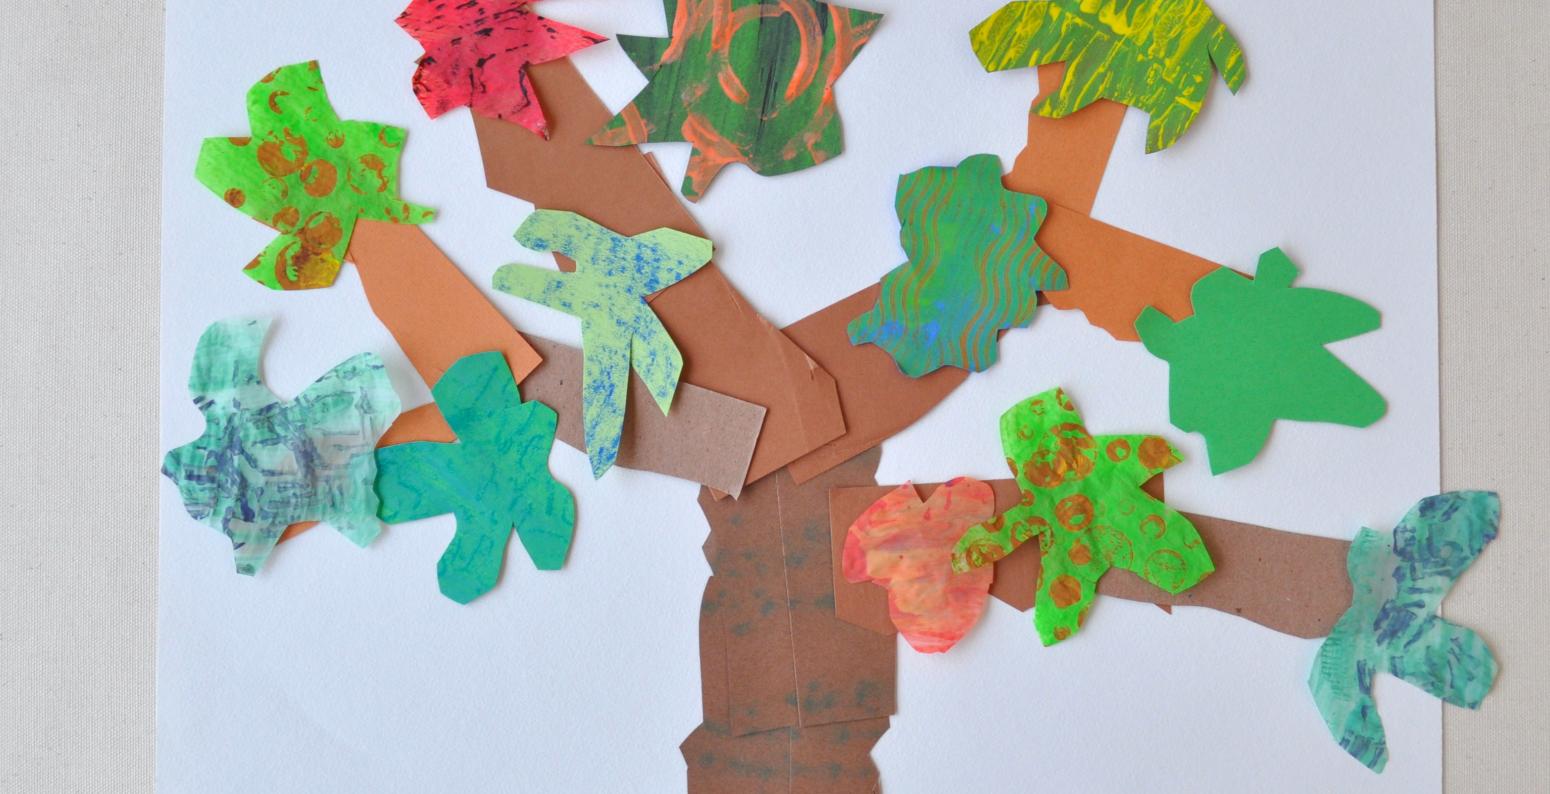 A picture of a tree made out of brightly colored and textured collage papers.